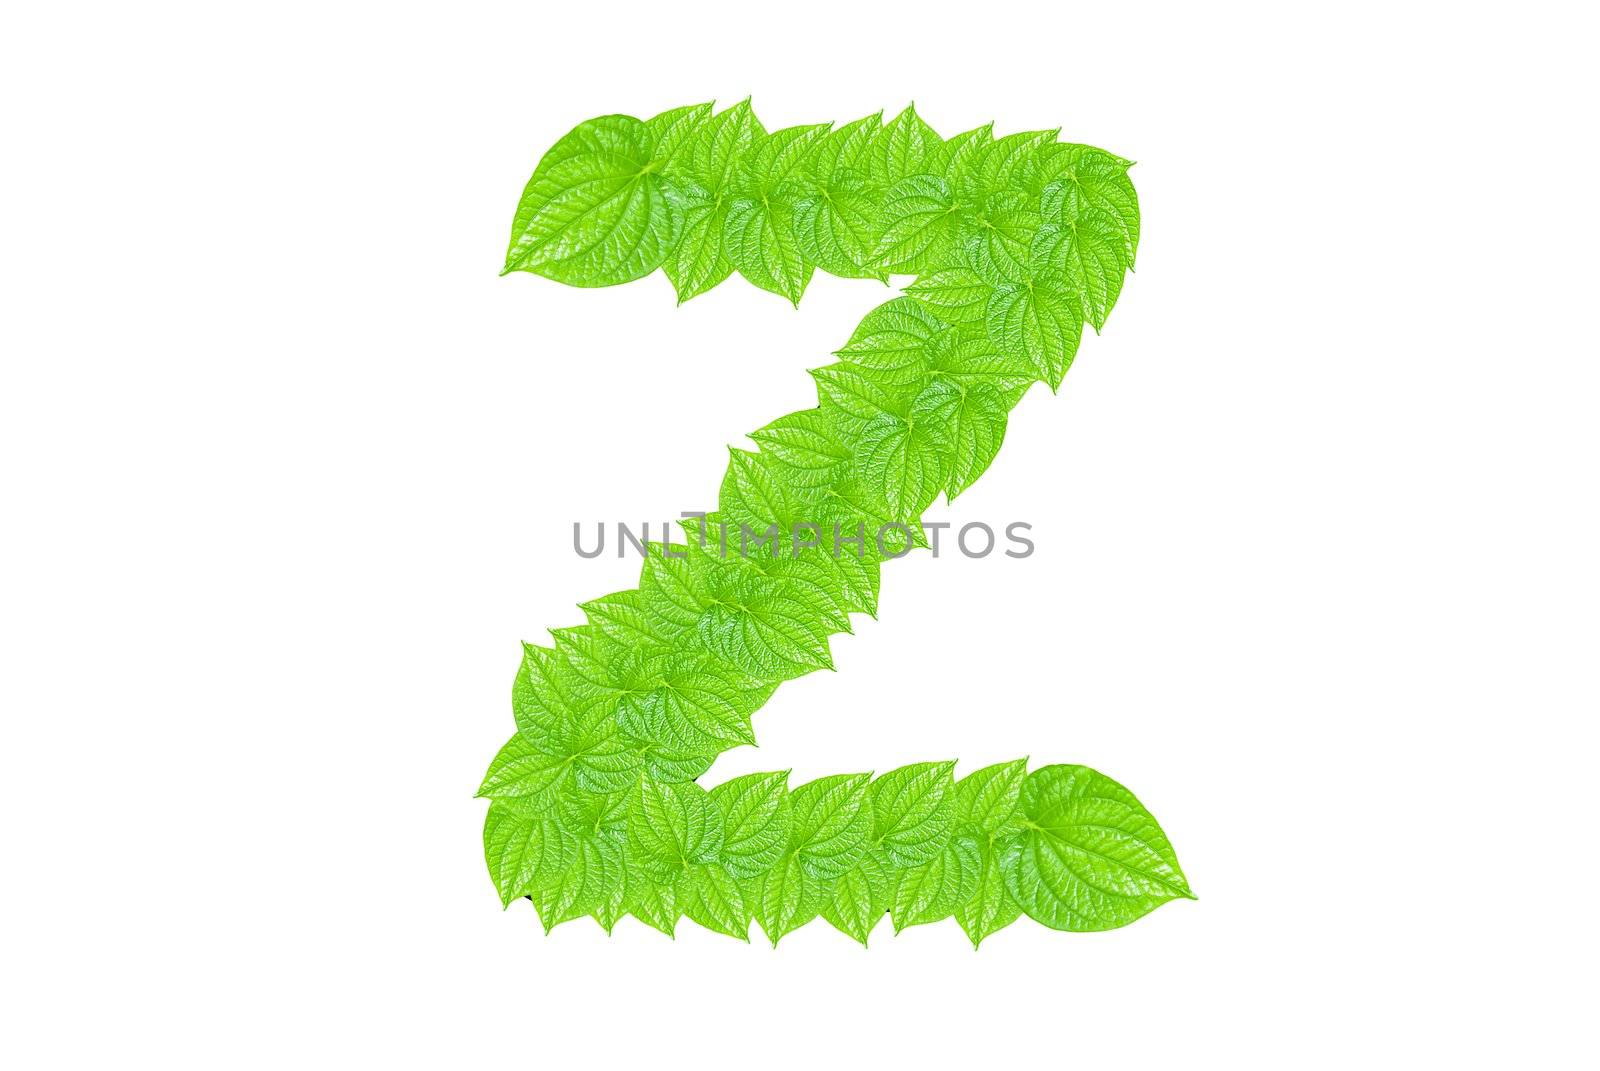 English alphabet made from green leafs by sasilsolutions